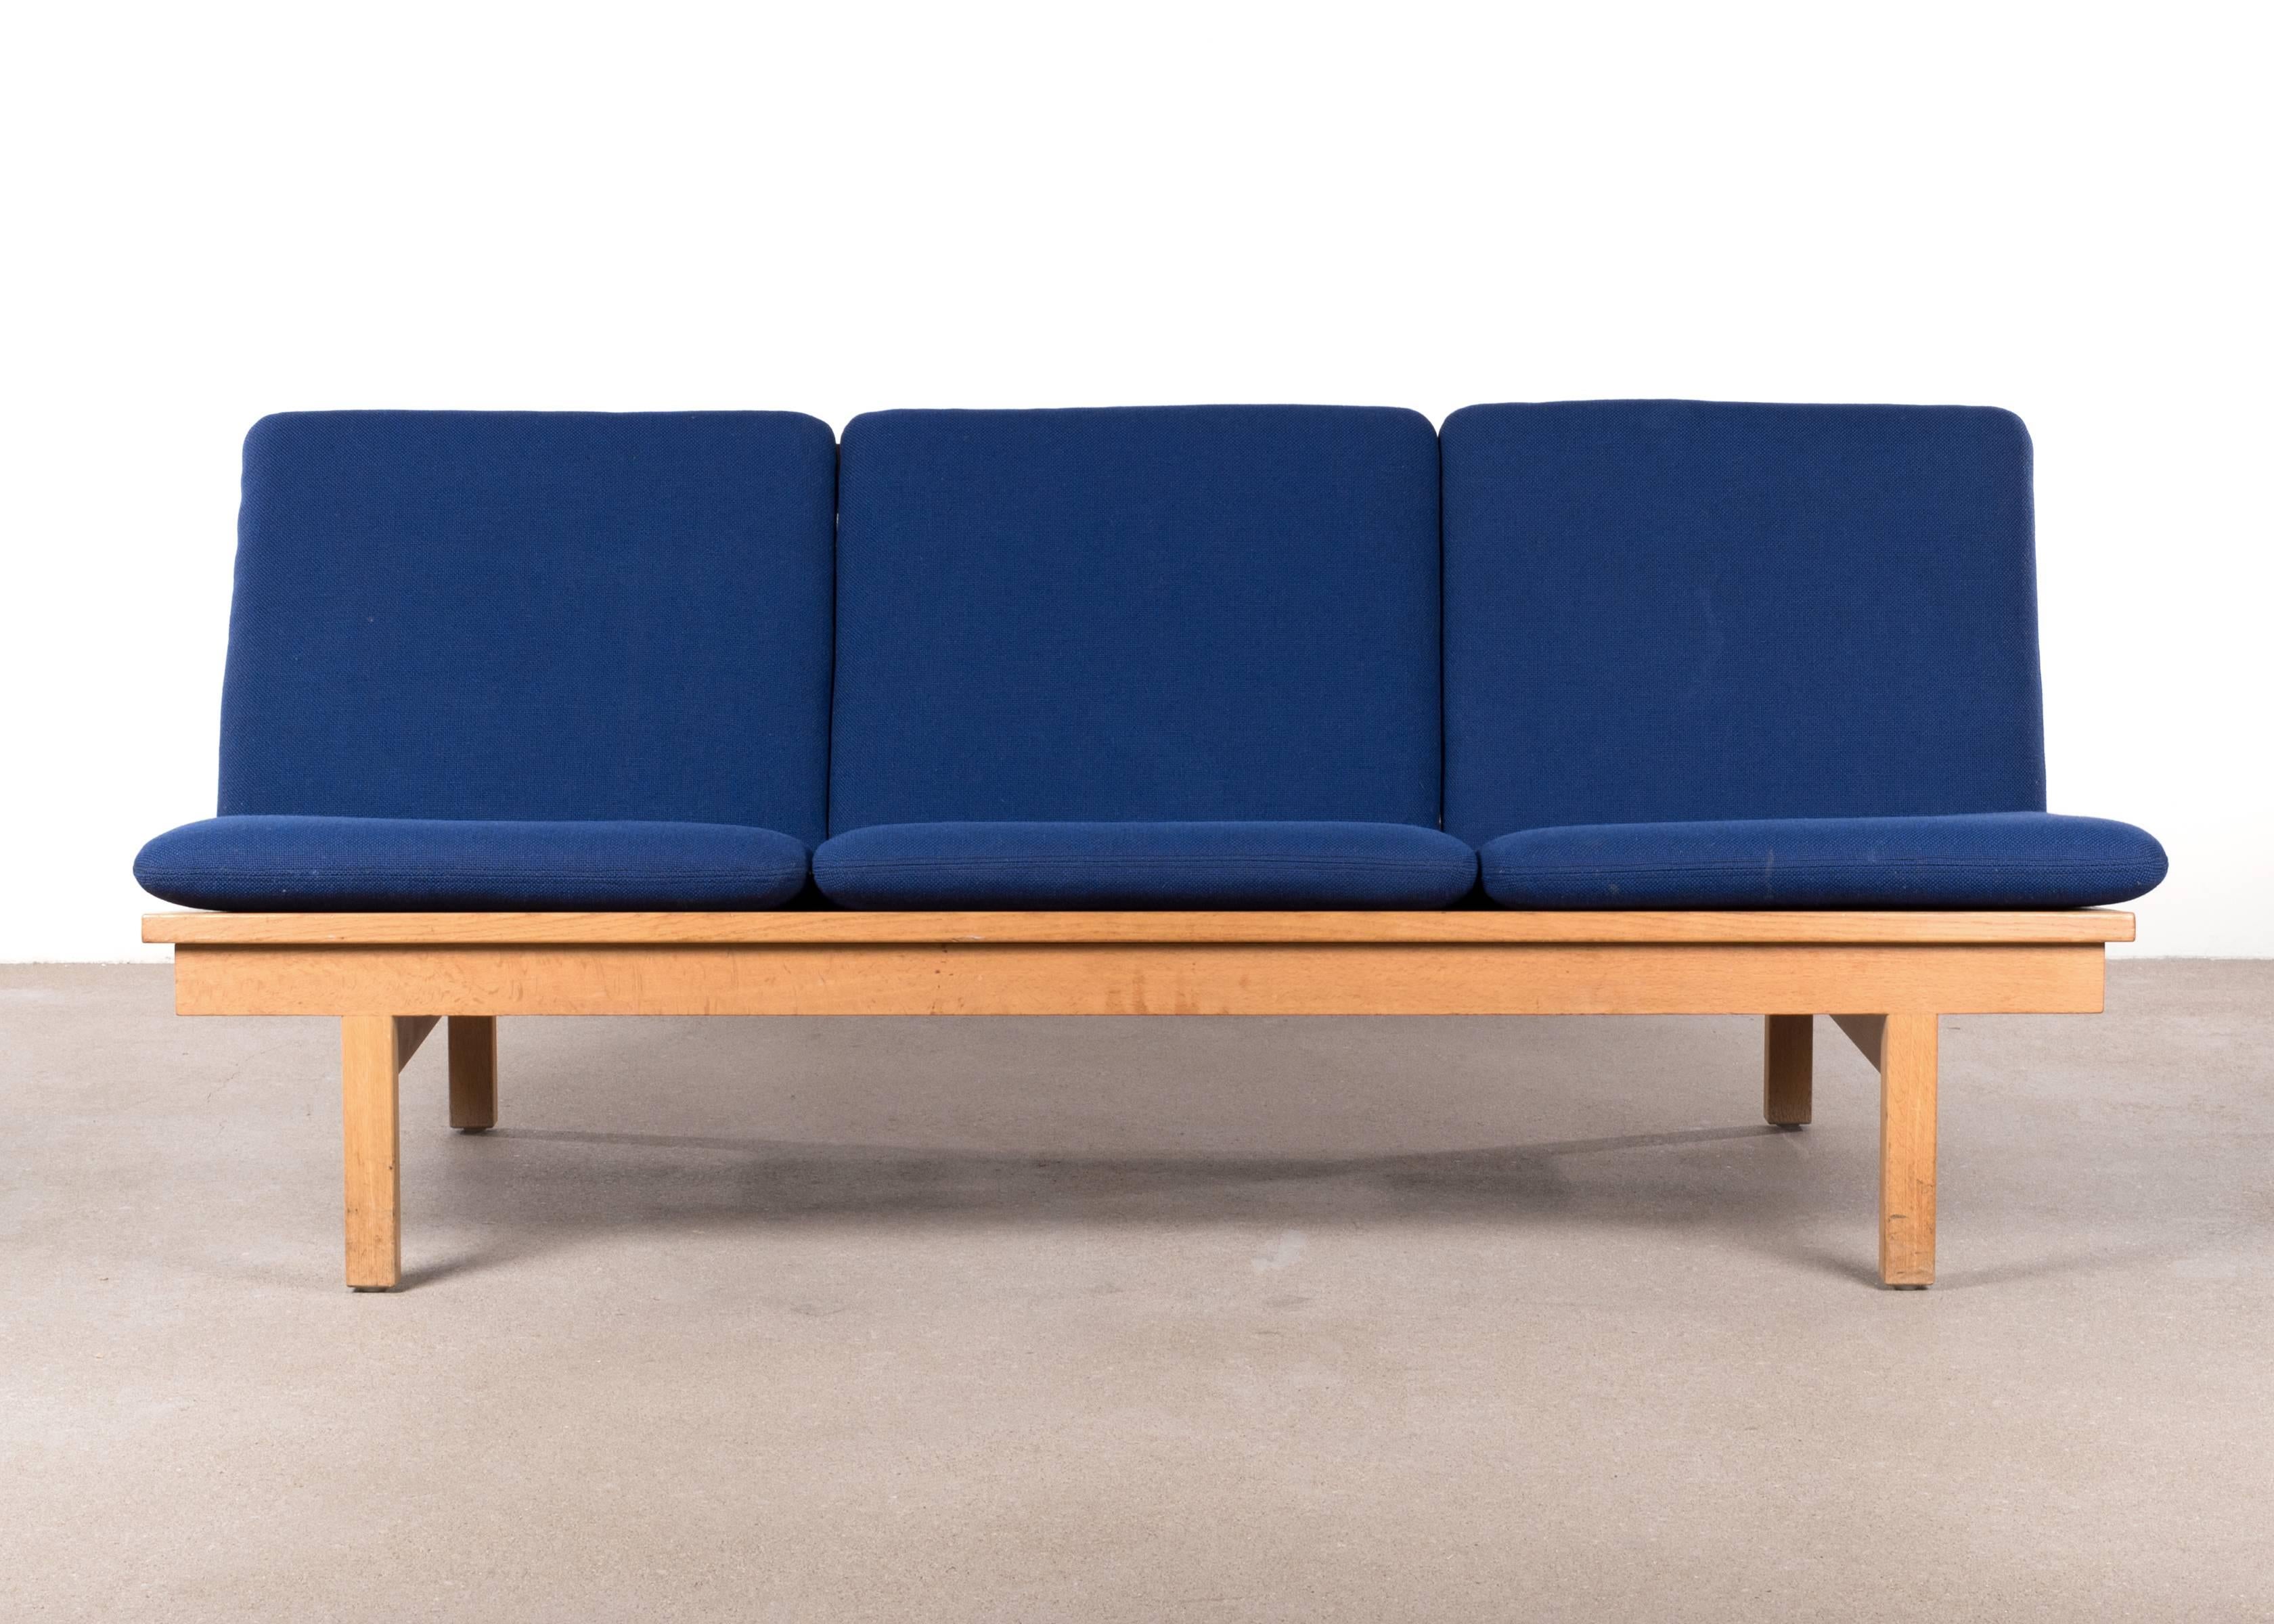 Bench model 2218 by Børge Mogensen for Fredericia Stolefabrik. Wooden oak frame with loose cushions upholstered in with original blue / violet Kvadrat wool. Very light wear on frame and cushions, overall in (very) good condition. Reupholstery is